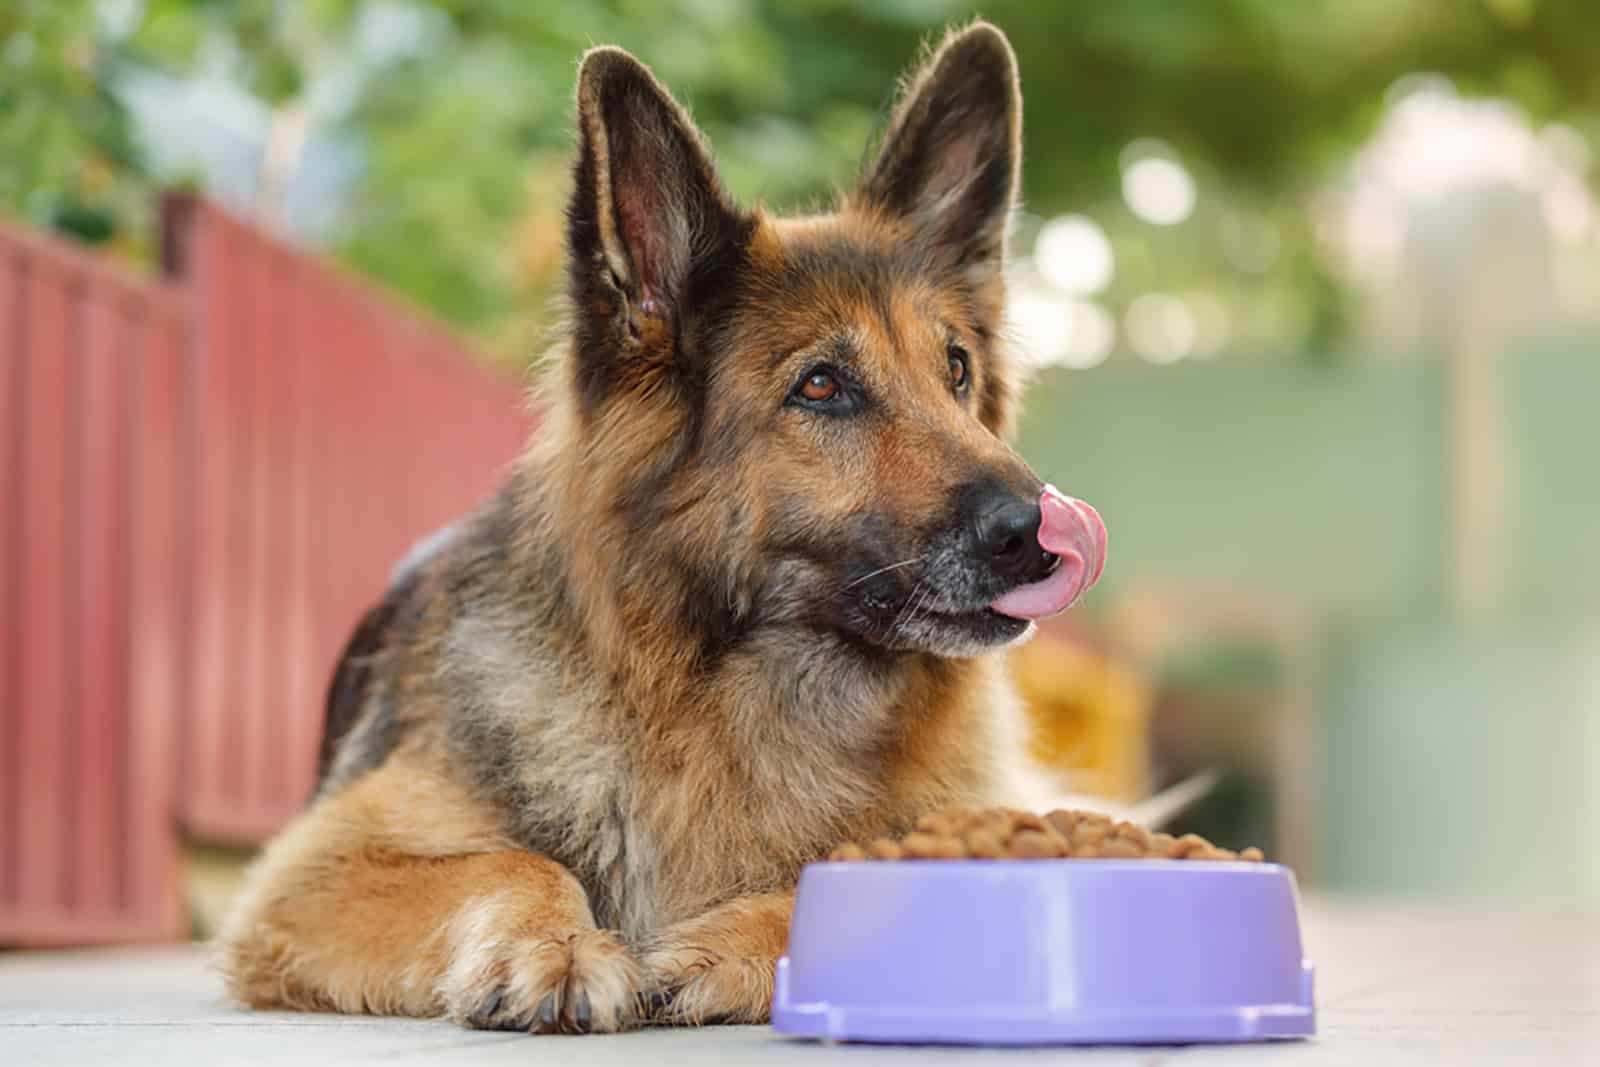 German Shepherd dog lying next to a bowl with dry food